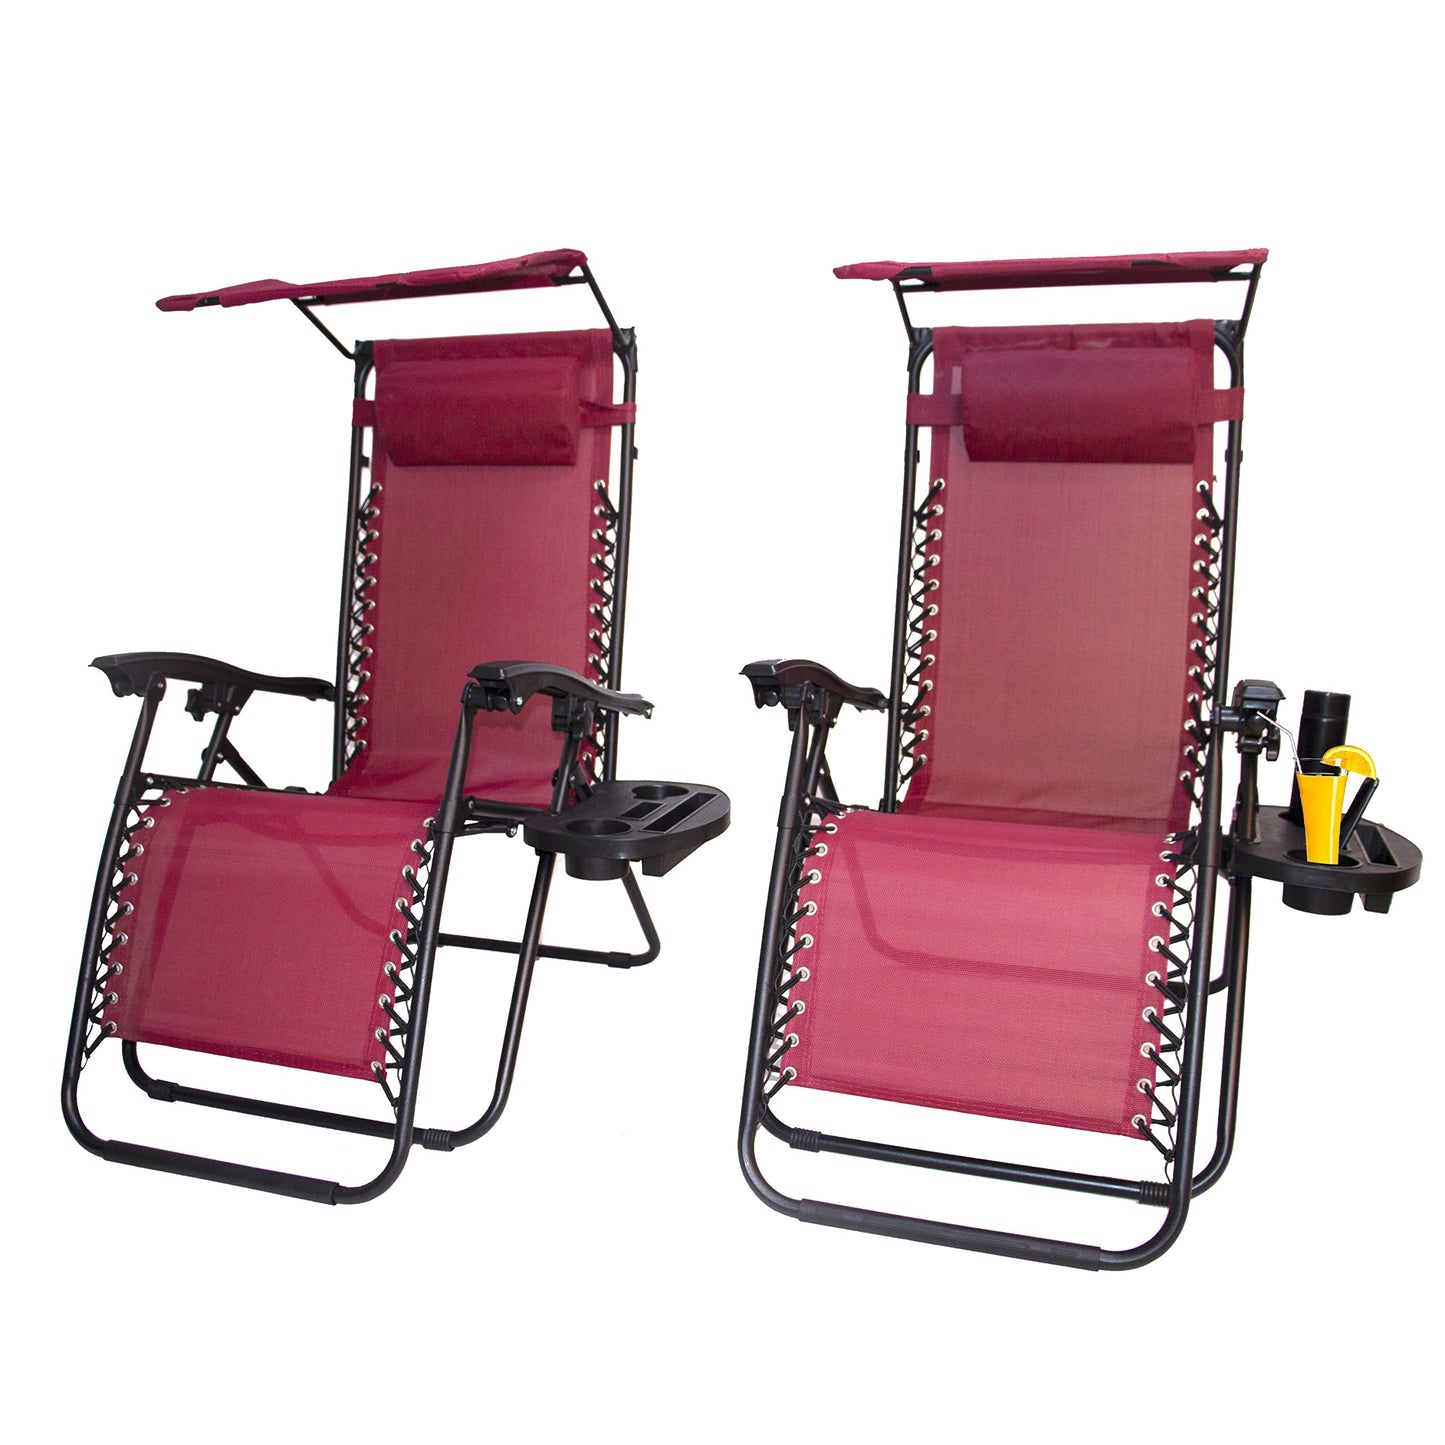 BTEXPERT CC5044BY Zero Gravity Chair Lounge Outdoor Pool Patio Beach Yard Garden Sunshade Utility Tray Cup Holder BurgundyTwo Case Pack (Set of 2 pcs), Two Piece, Burgundy avec Canopy